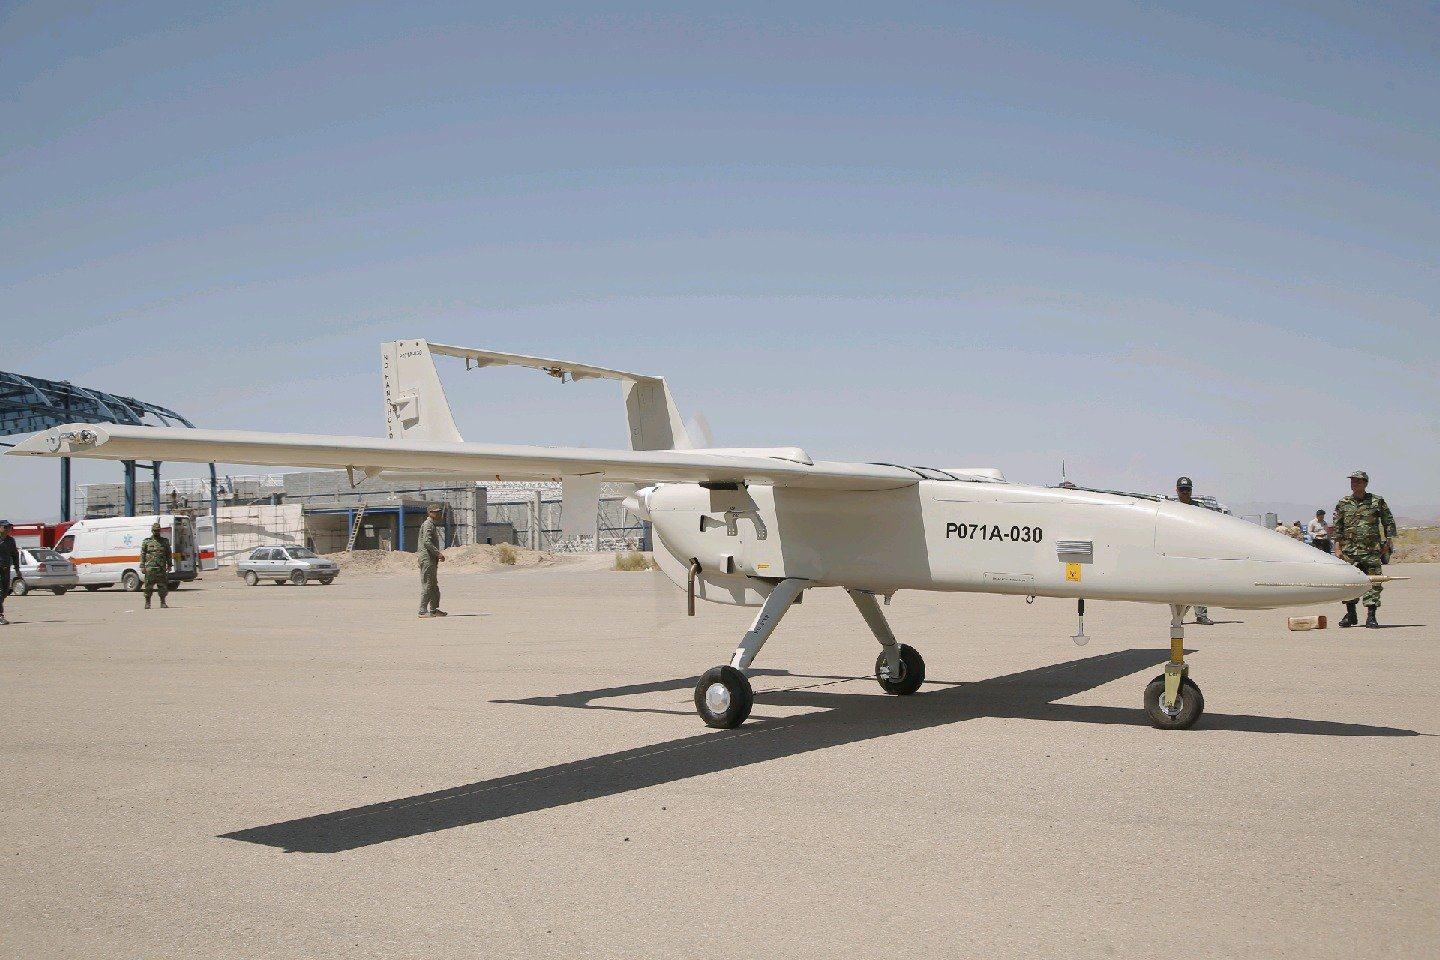 Iranian Mohajer-6 drone has foreign components and even a Ukrainian part - steering system